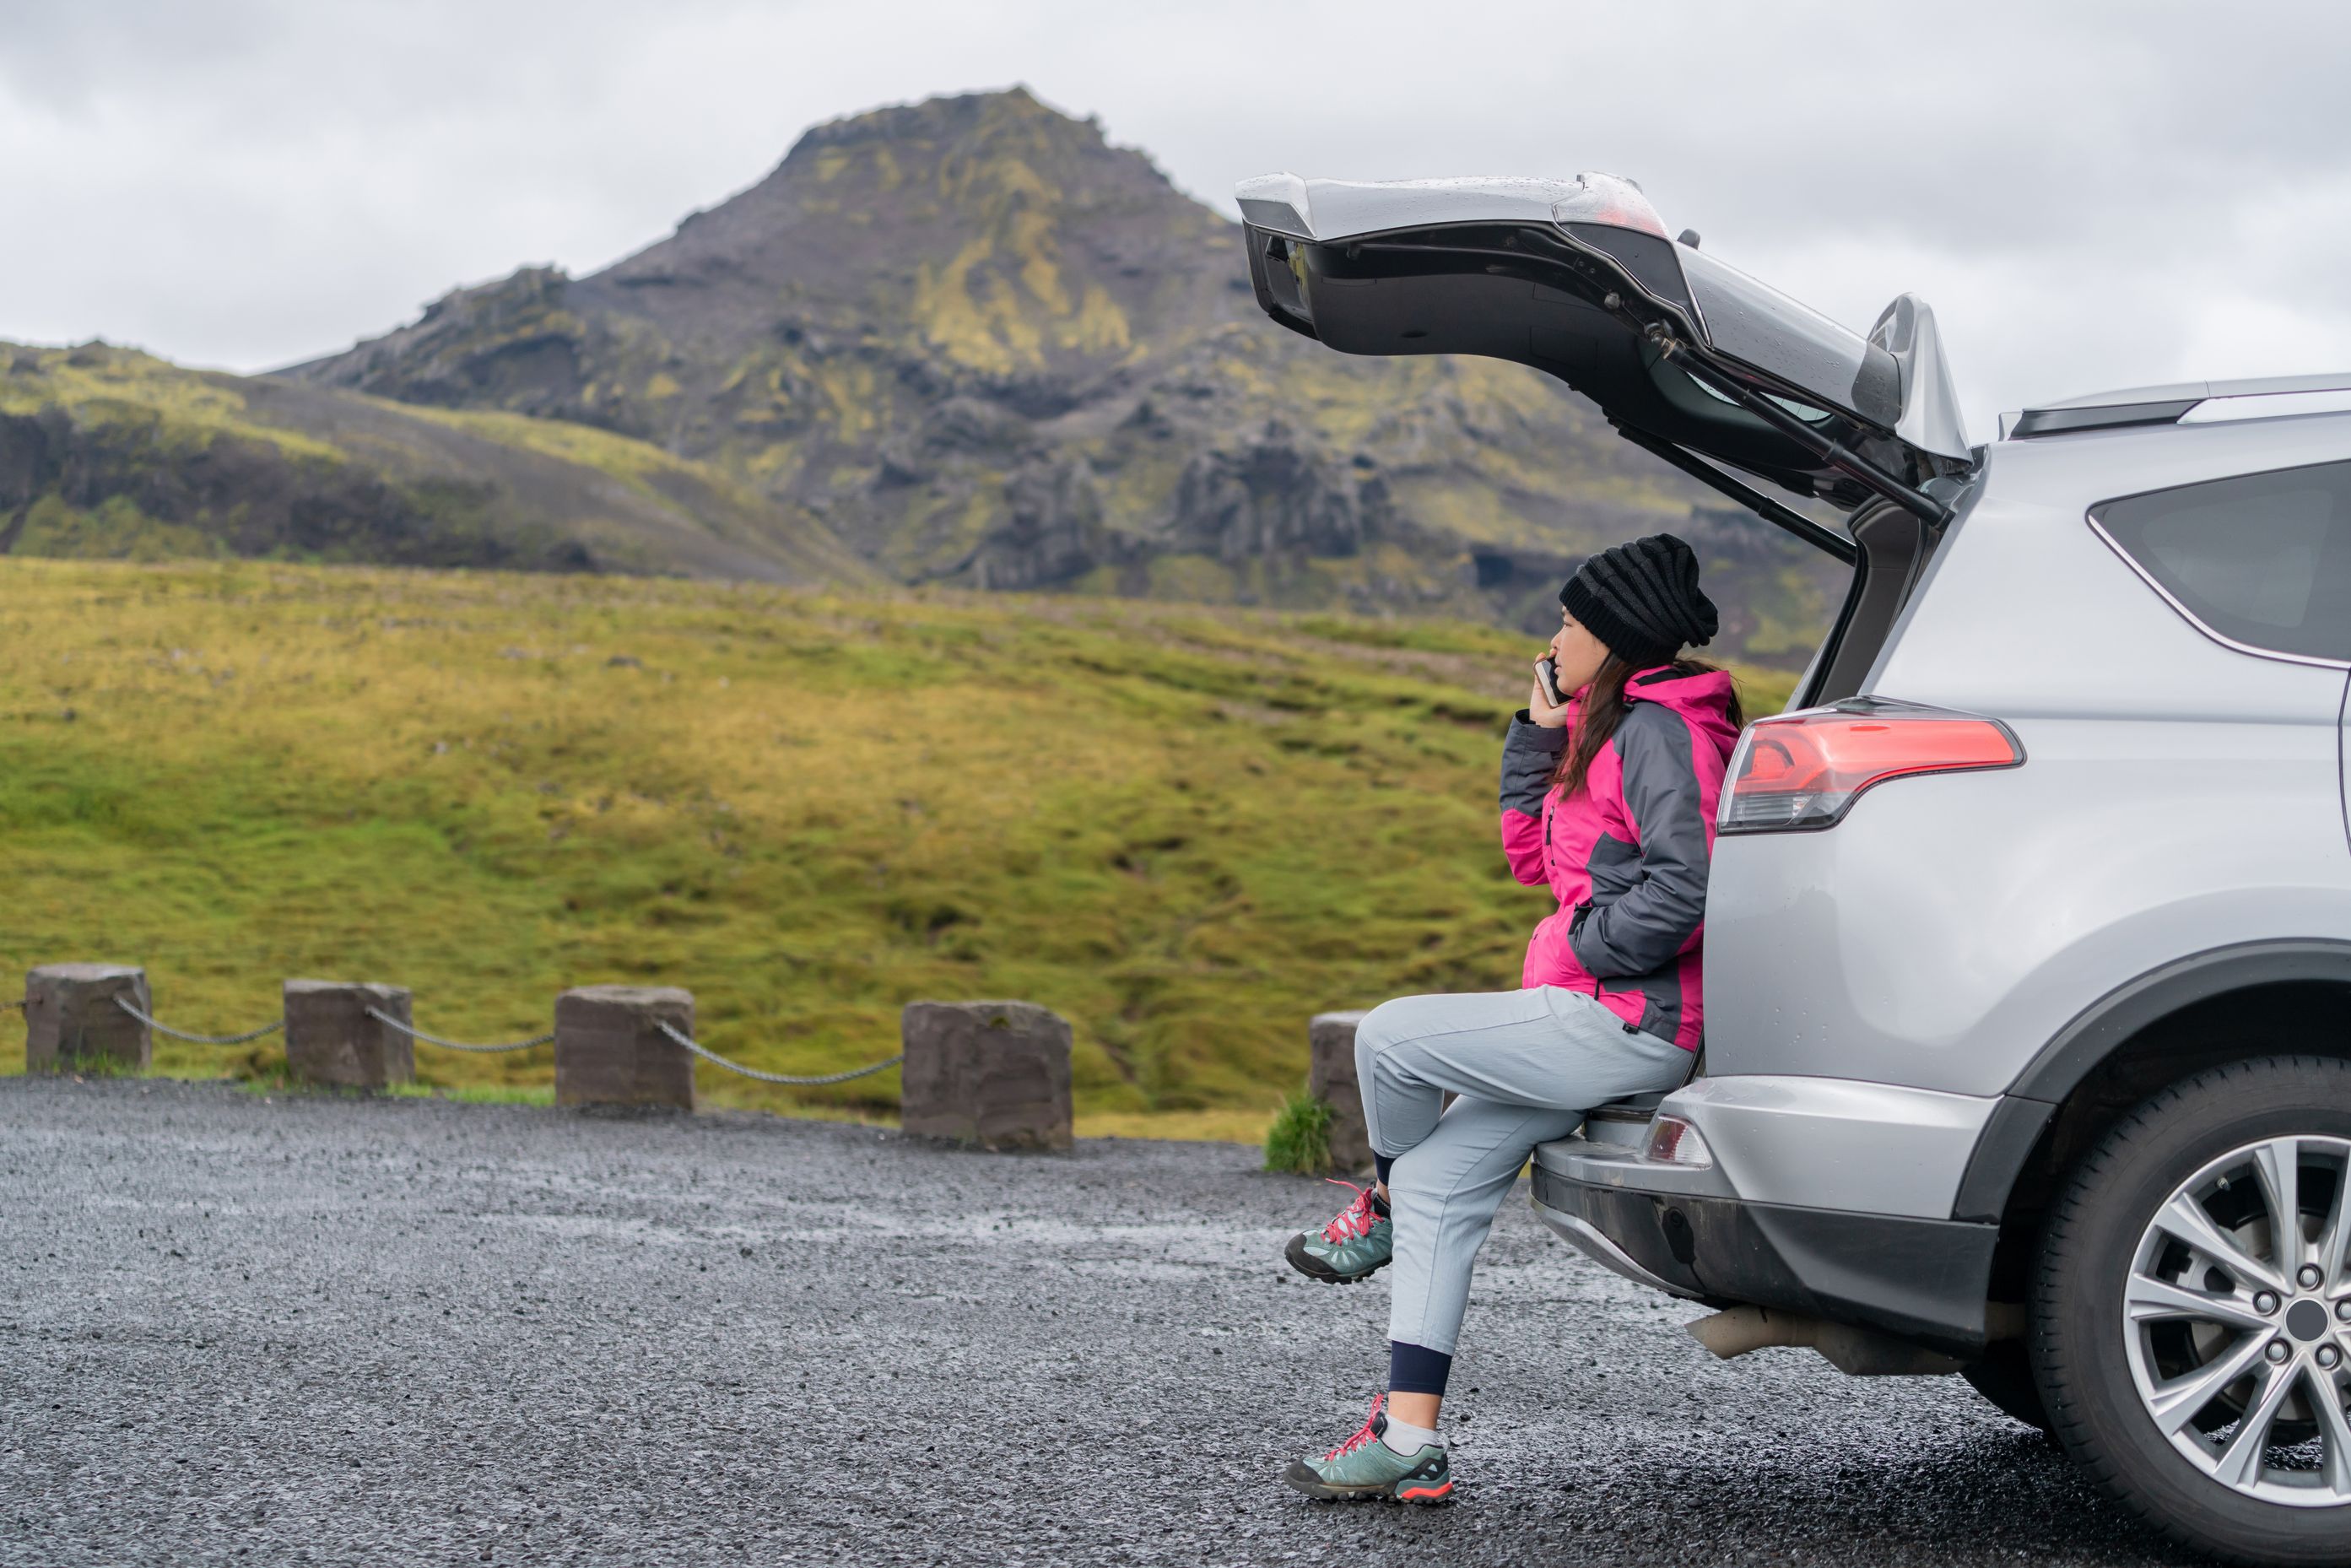 Car rental in Iceland with a person and a picturesque landscape in the background